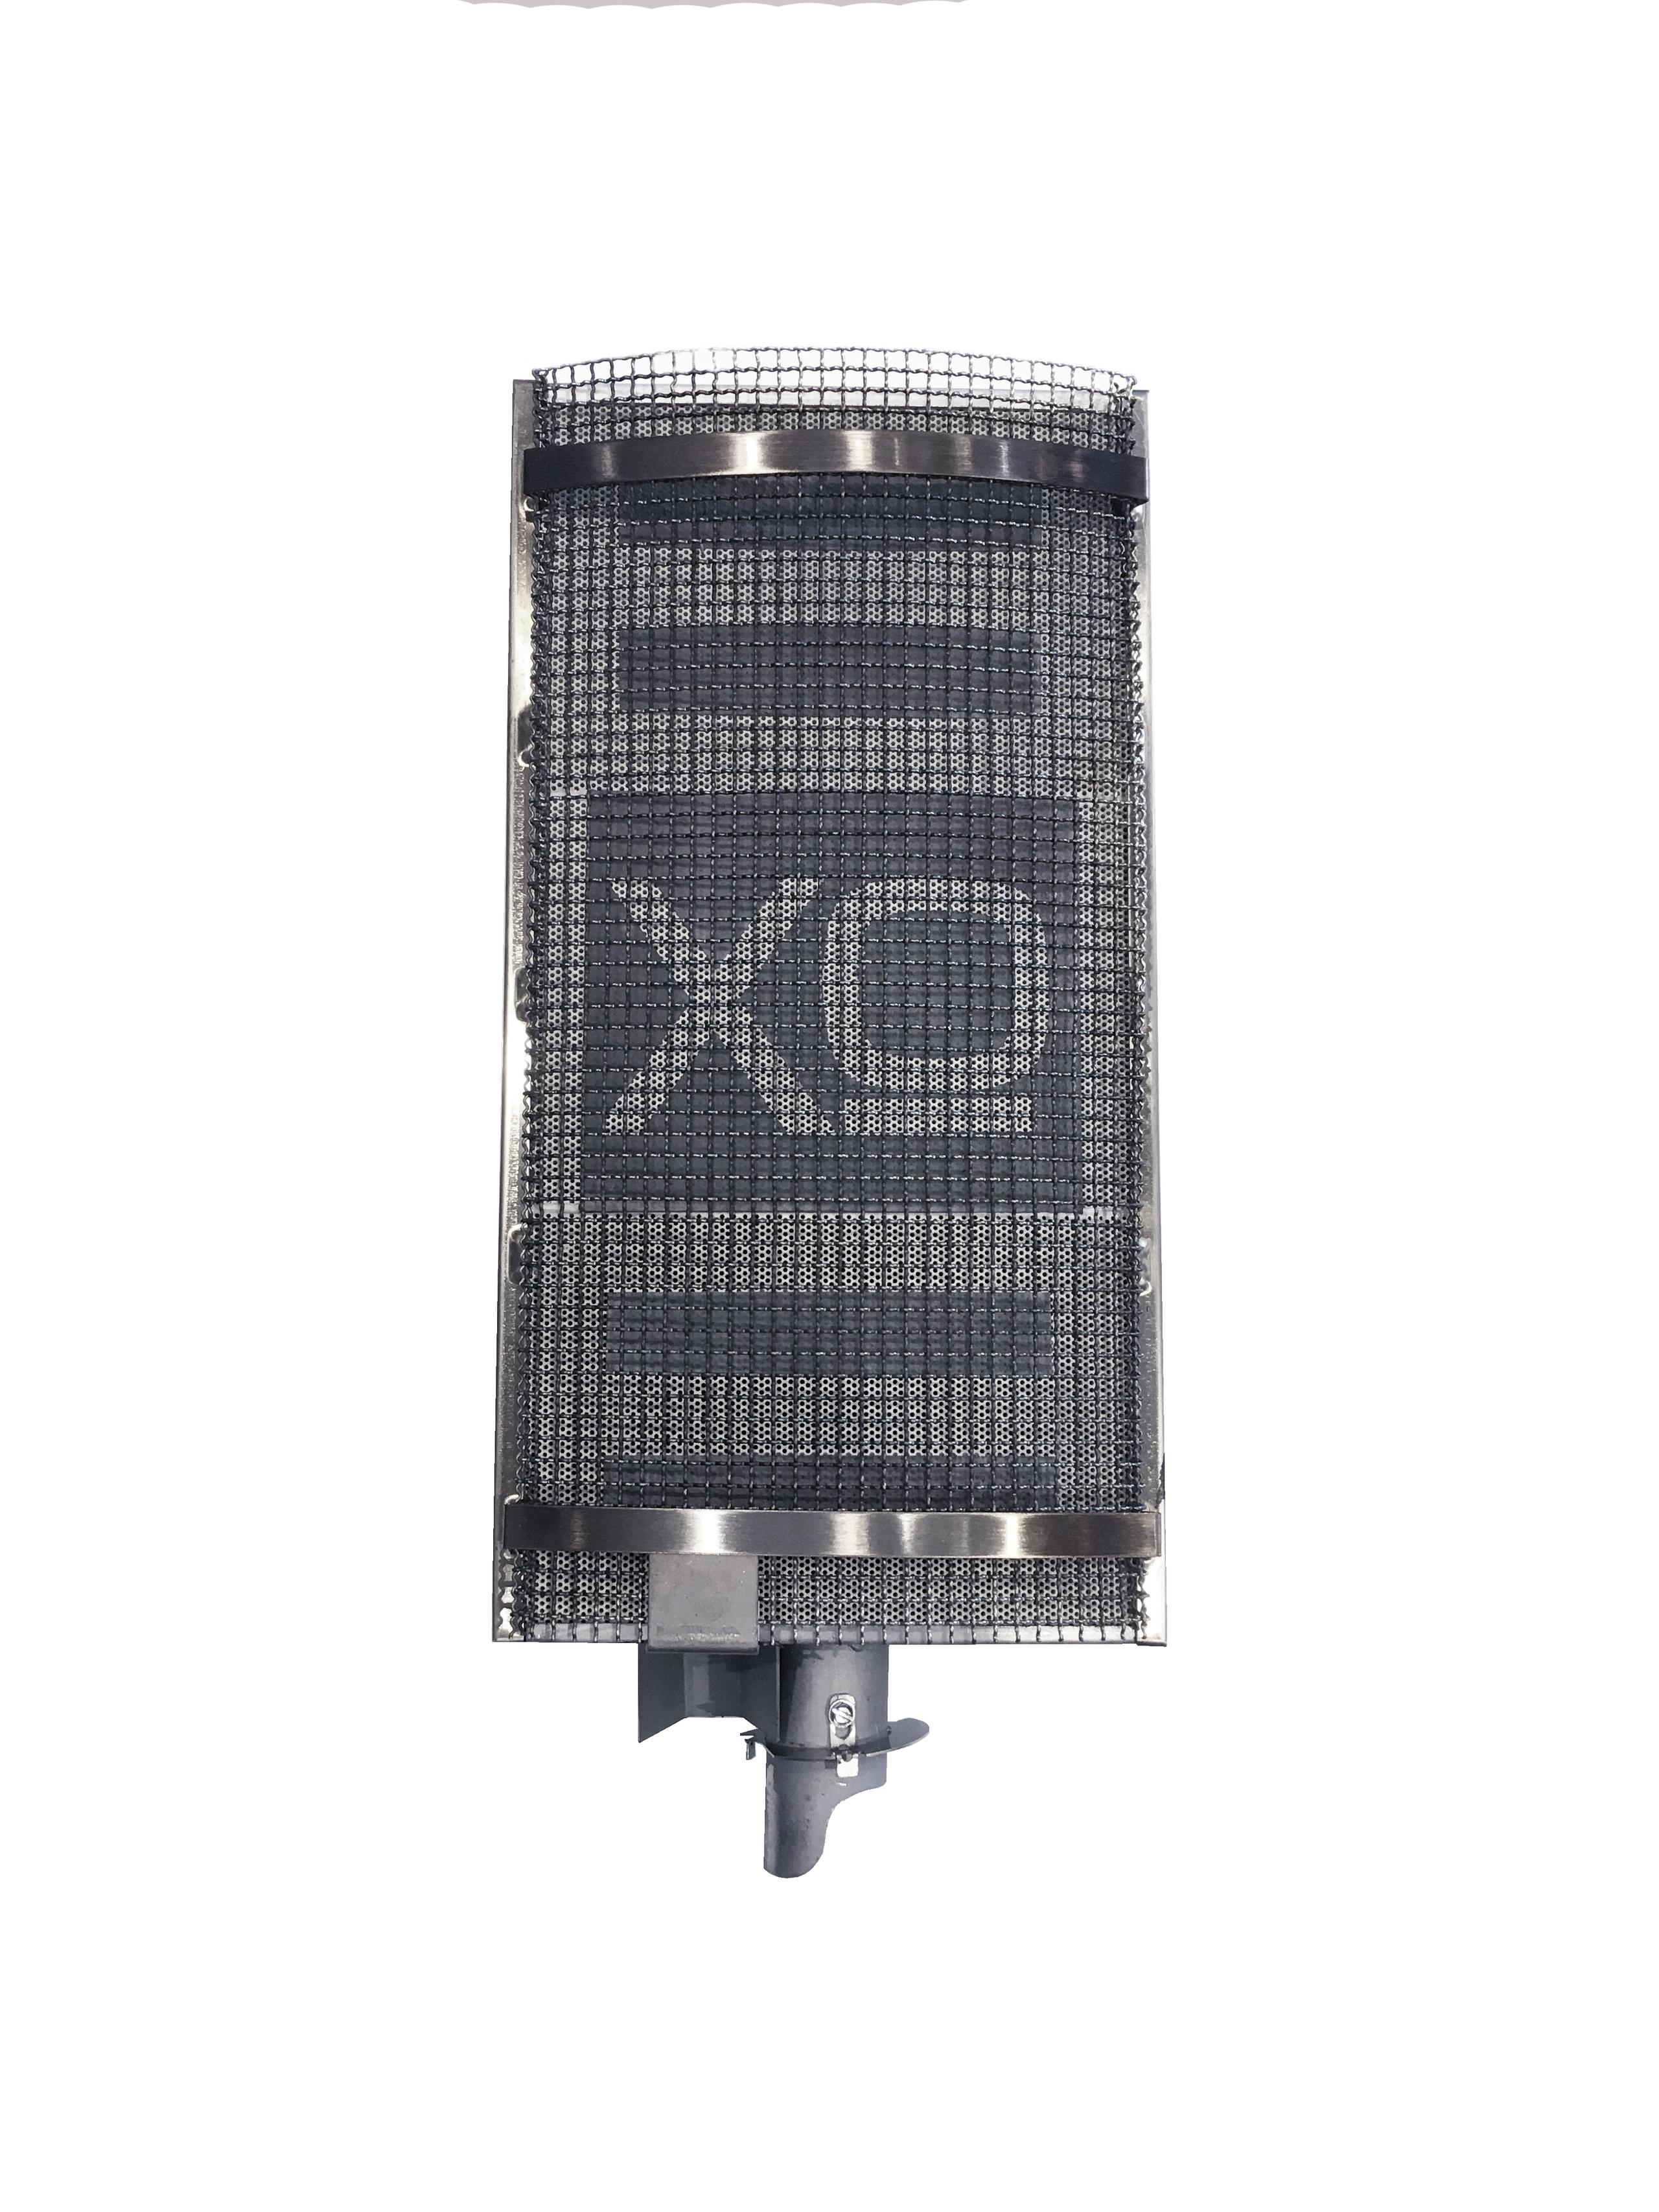 Xo Appliance XOG30IR Infrared Variable Temperature Burner For 30In Xo Grills